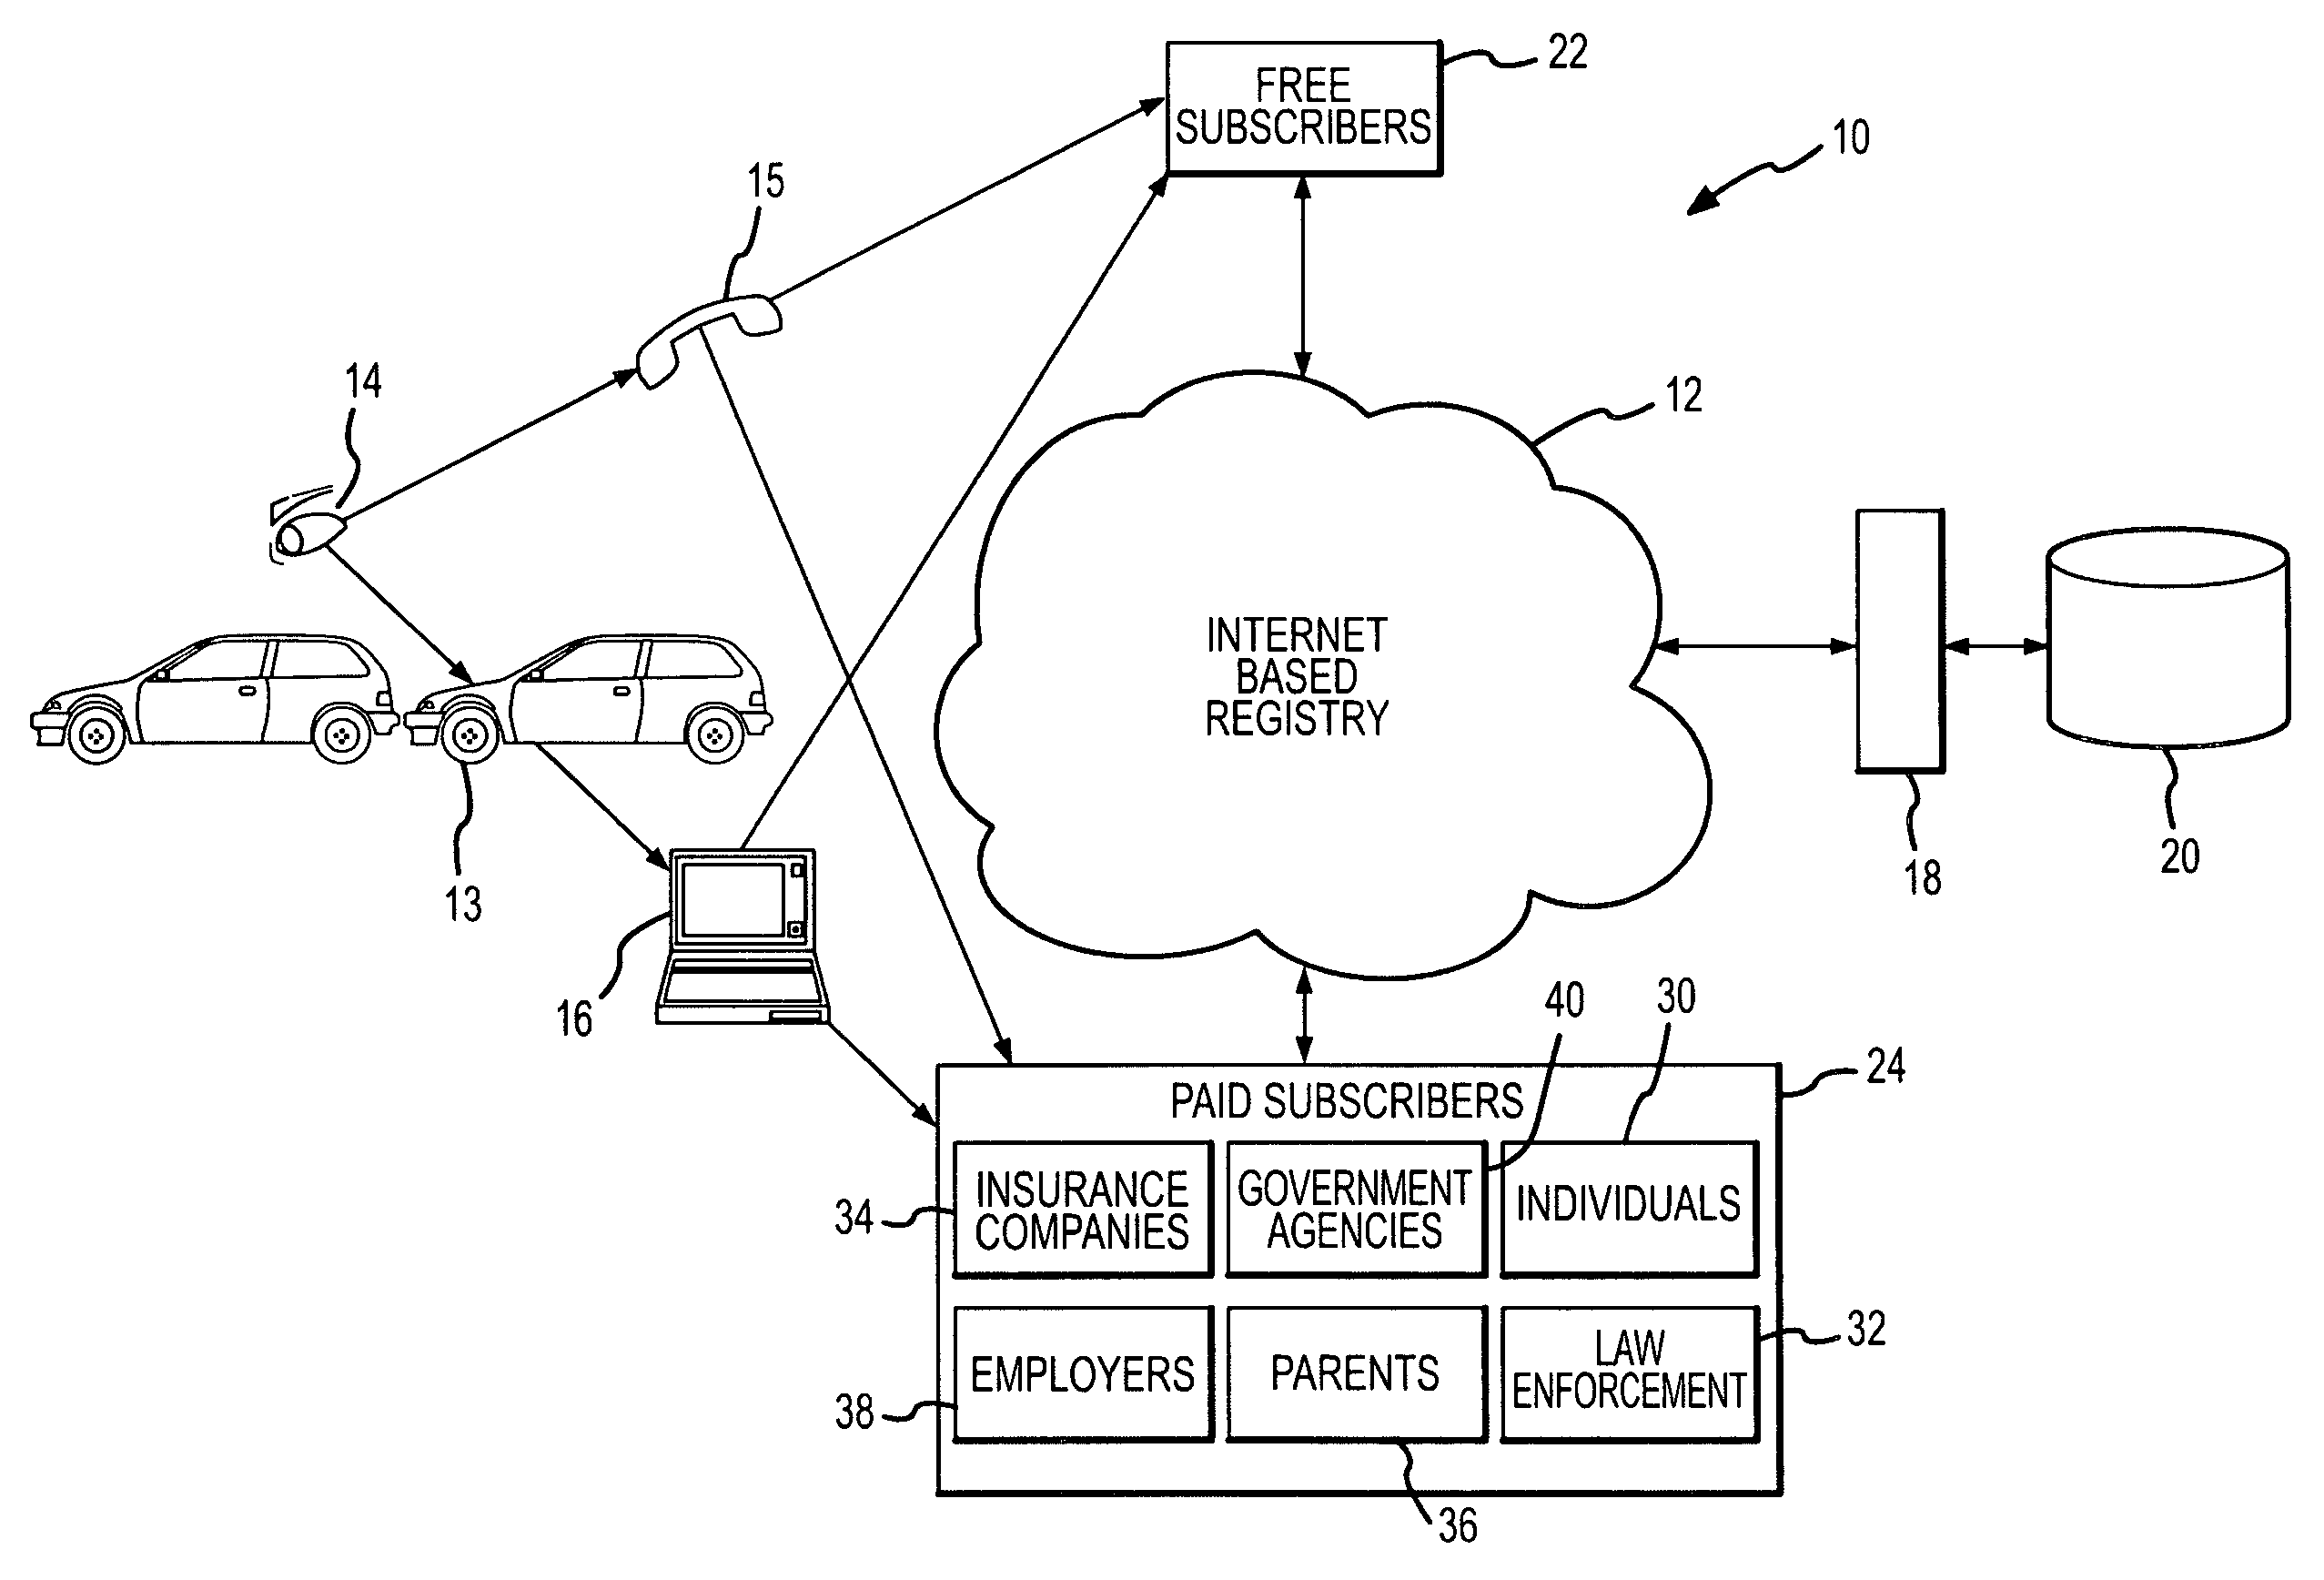 System and method for reporting and monitoring driving incidents